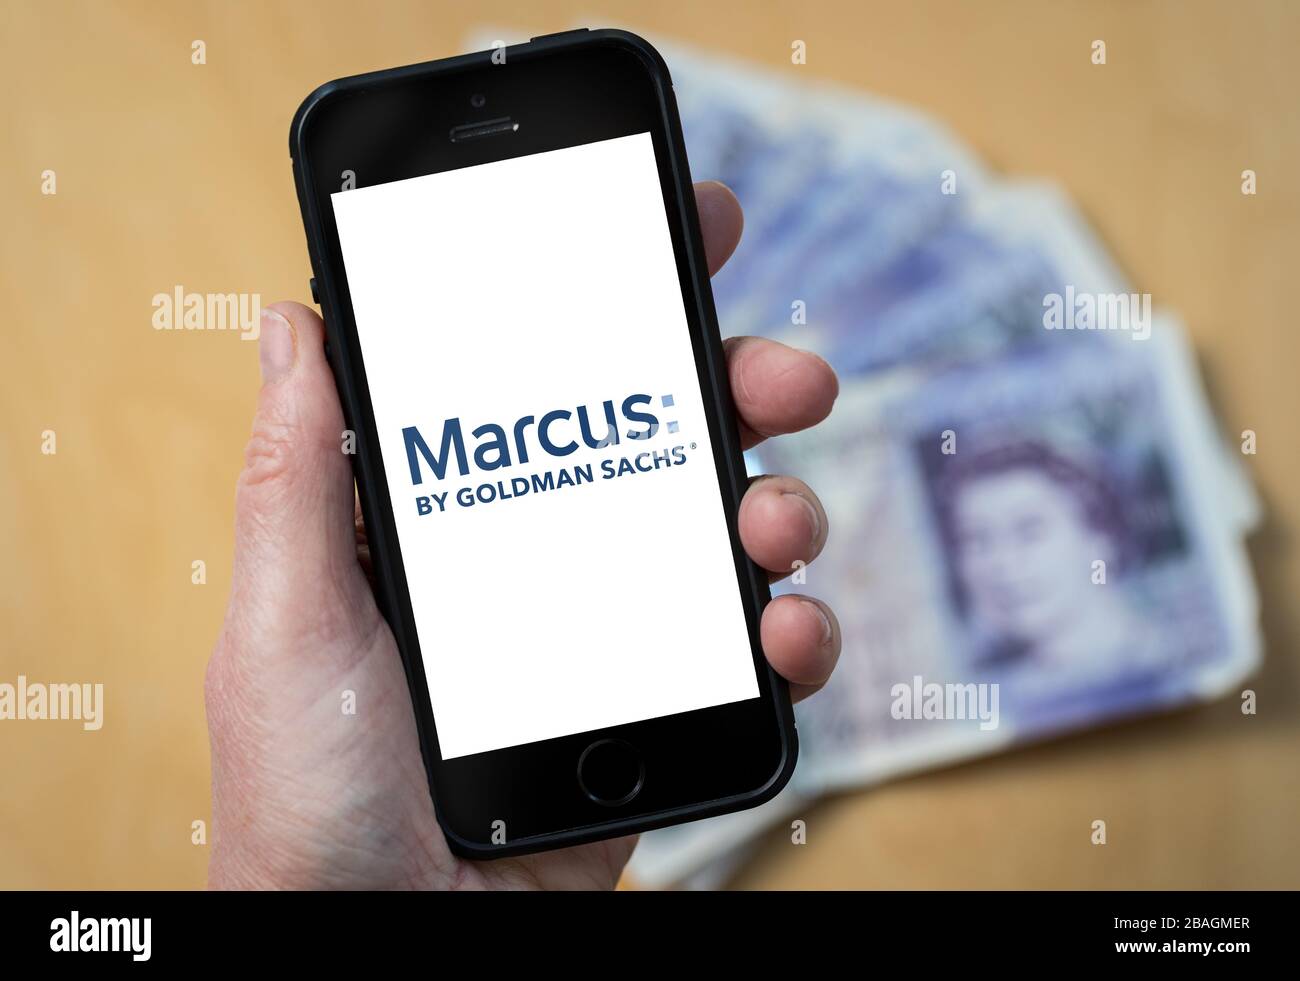 A woman looking at the Marcus Bank by Goldman Sachs logo on a mobile phone. (editorial Use Only) Stock Photo